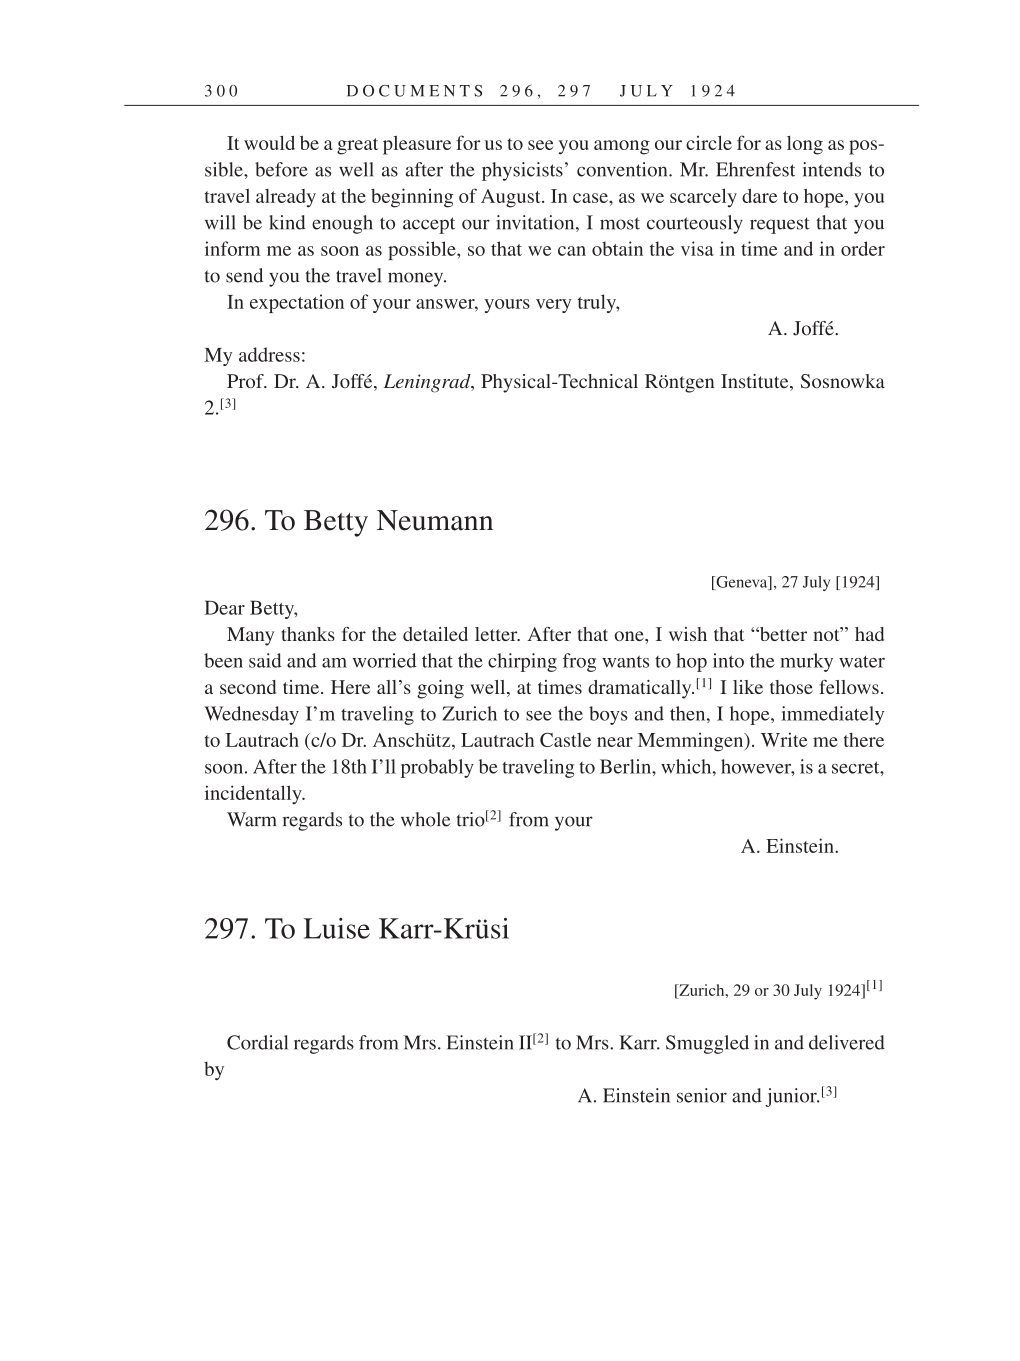 Volume 14: The Berlin Years: Writings & Correspondence, April 1923-May 1925 (English Translation Supplement) page 300